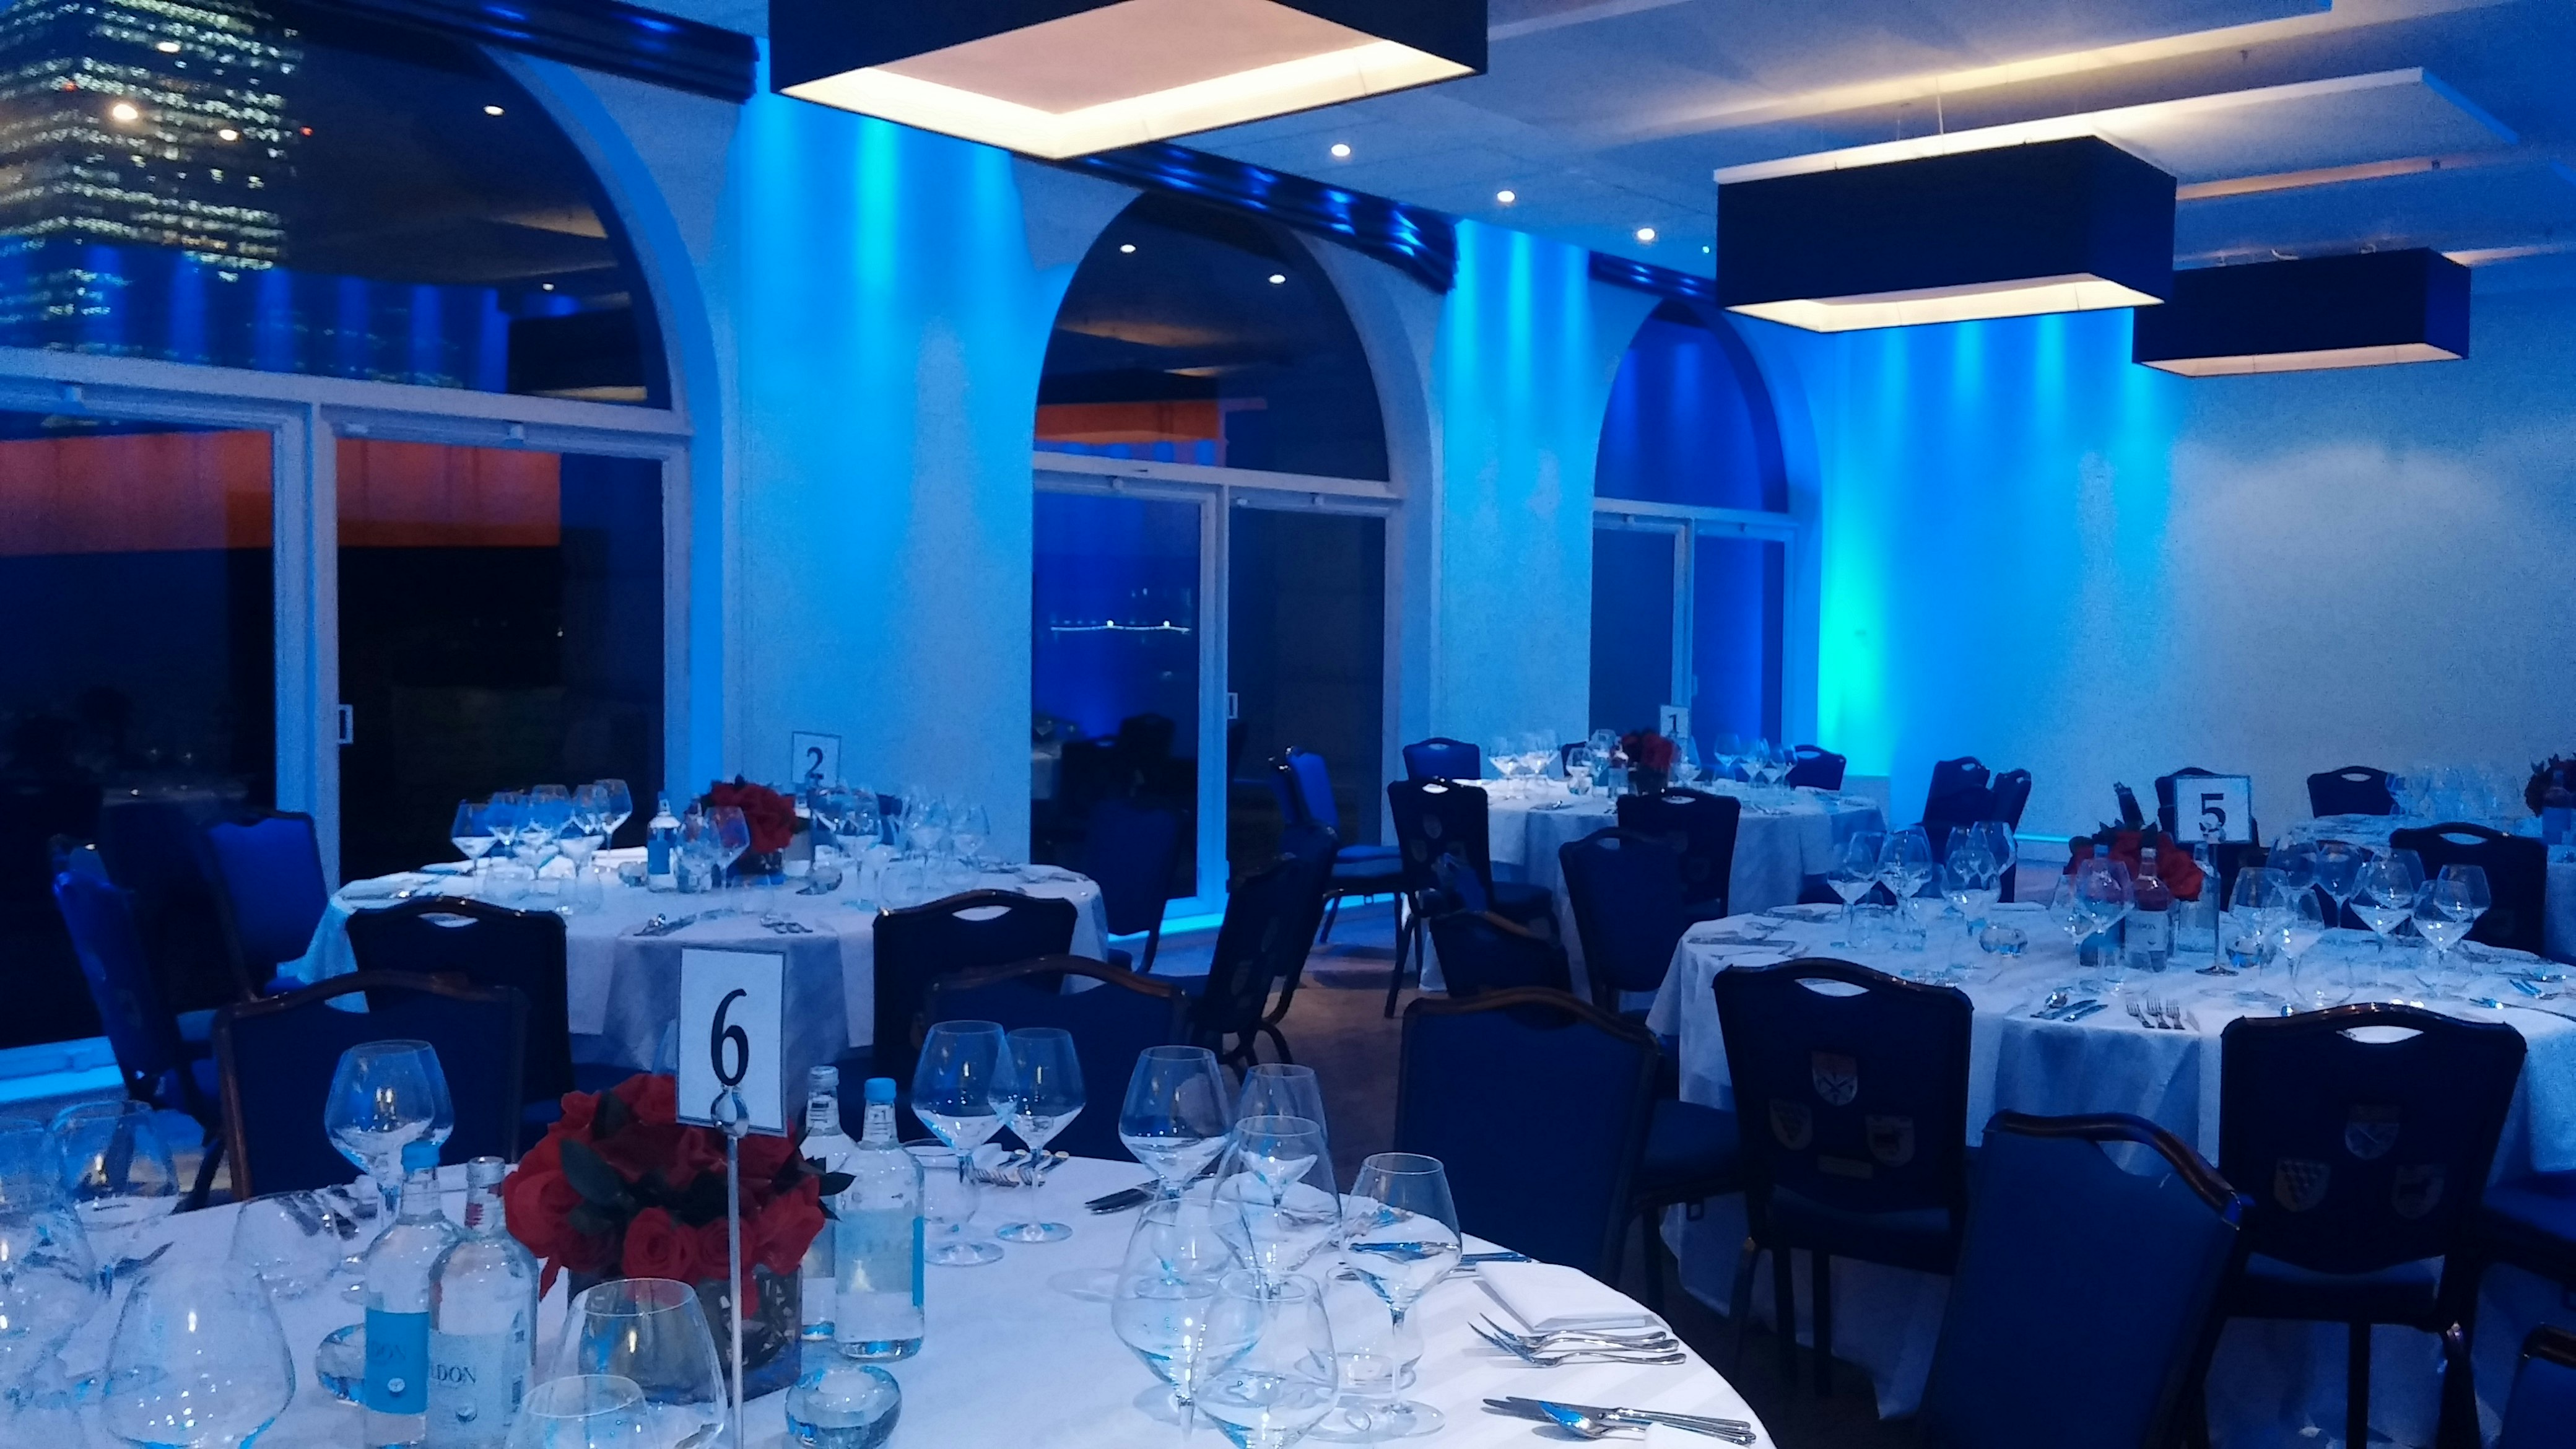 Glaziers Hall - The River Room image 4